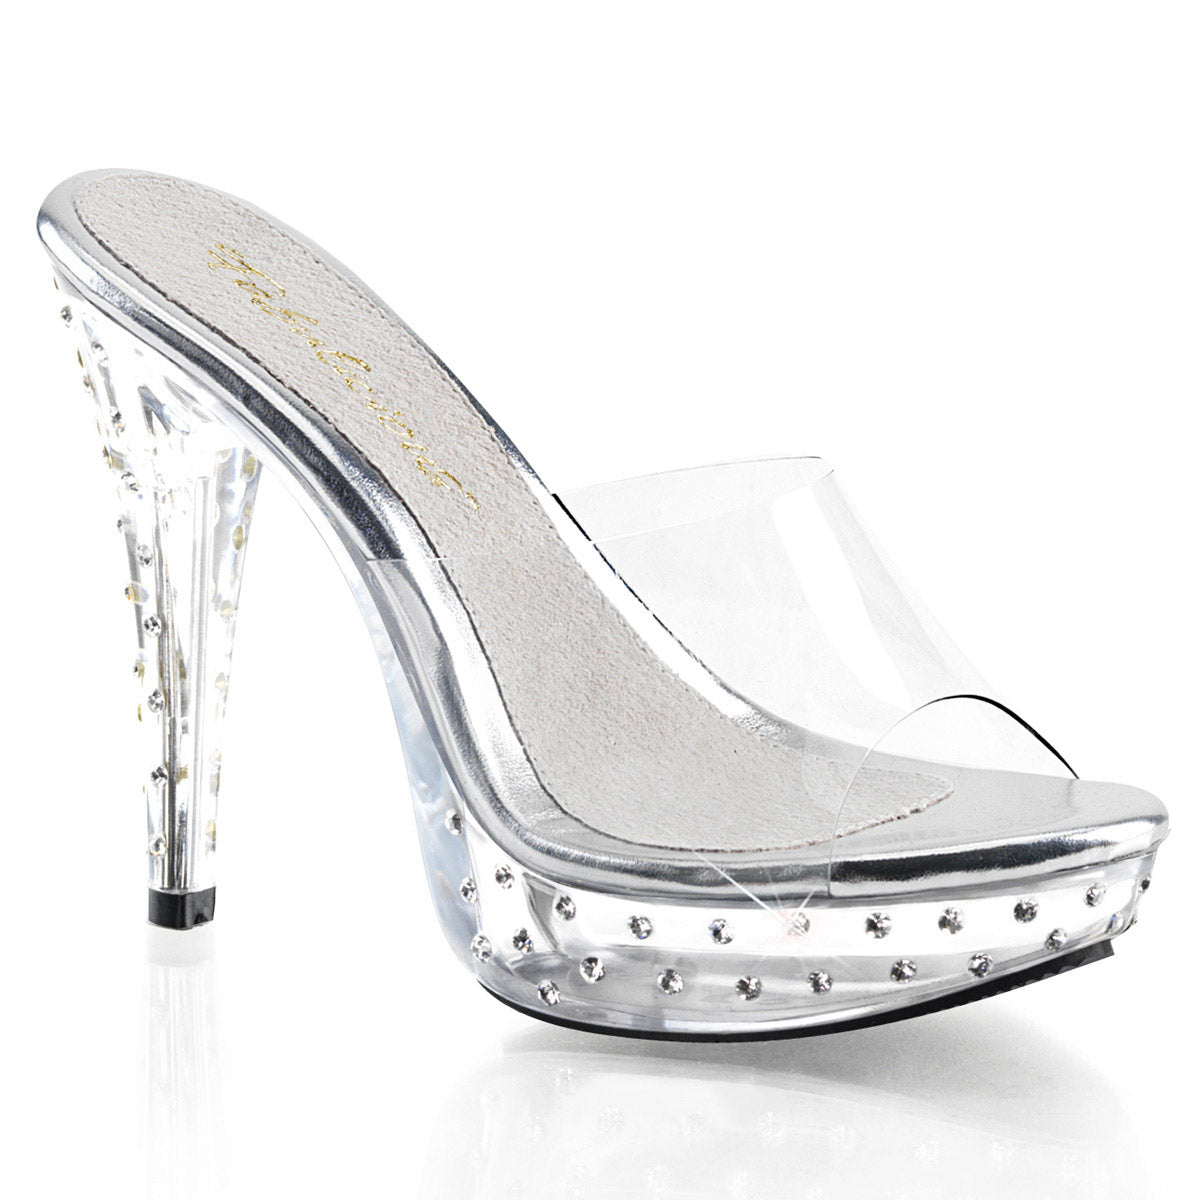 Sexy Rhinestone Encrusted Platforms Slide Mule High Heels Shoes Pleaser Fabulicious COCKTAIL/501SDT